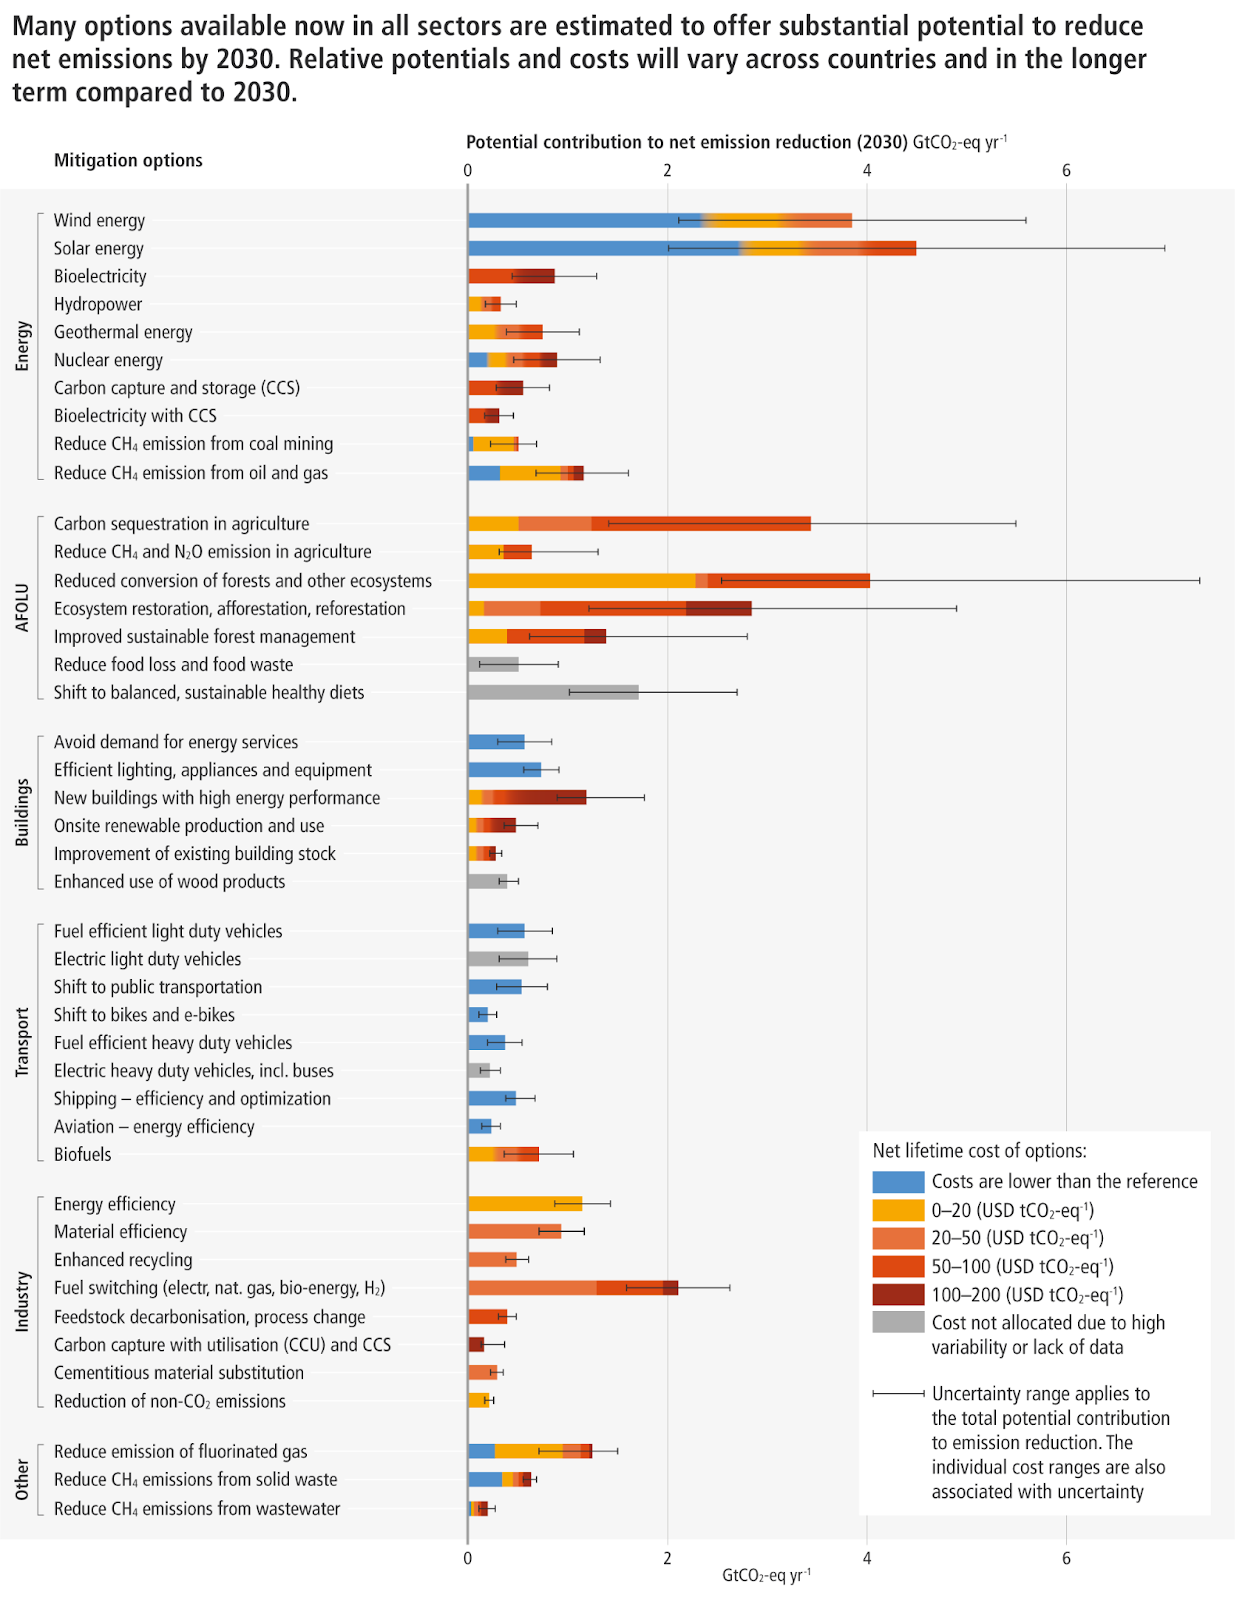 Overview of Mitigation Options and their Estimated Ranges of Costs and Potentials in 2030, Source: IPCC